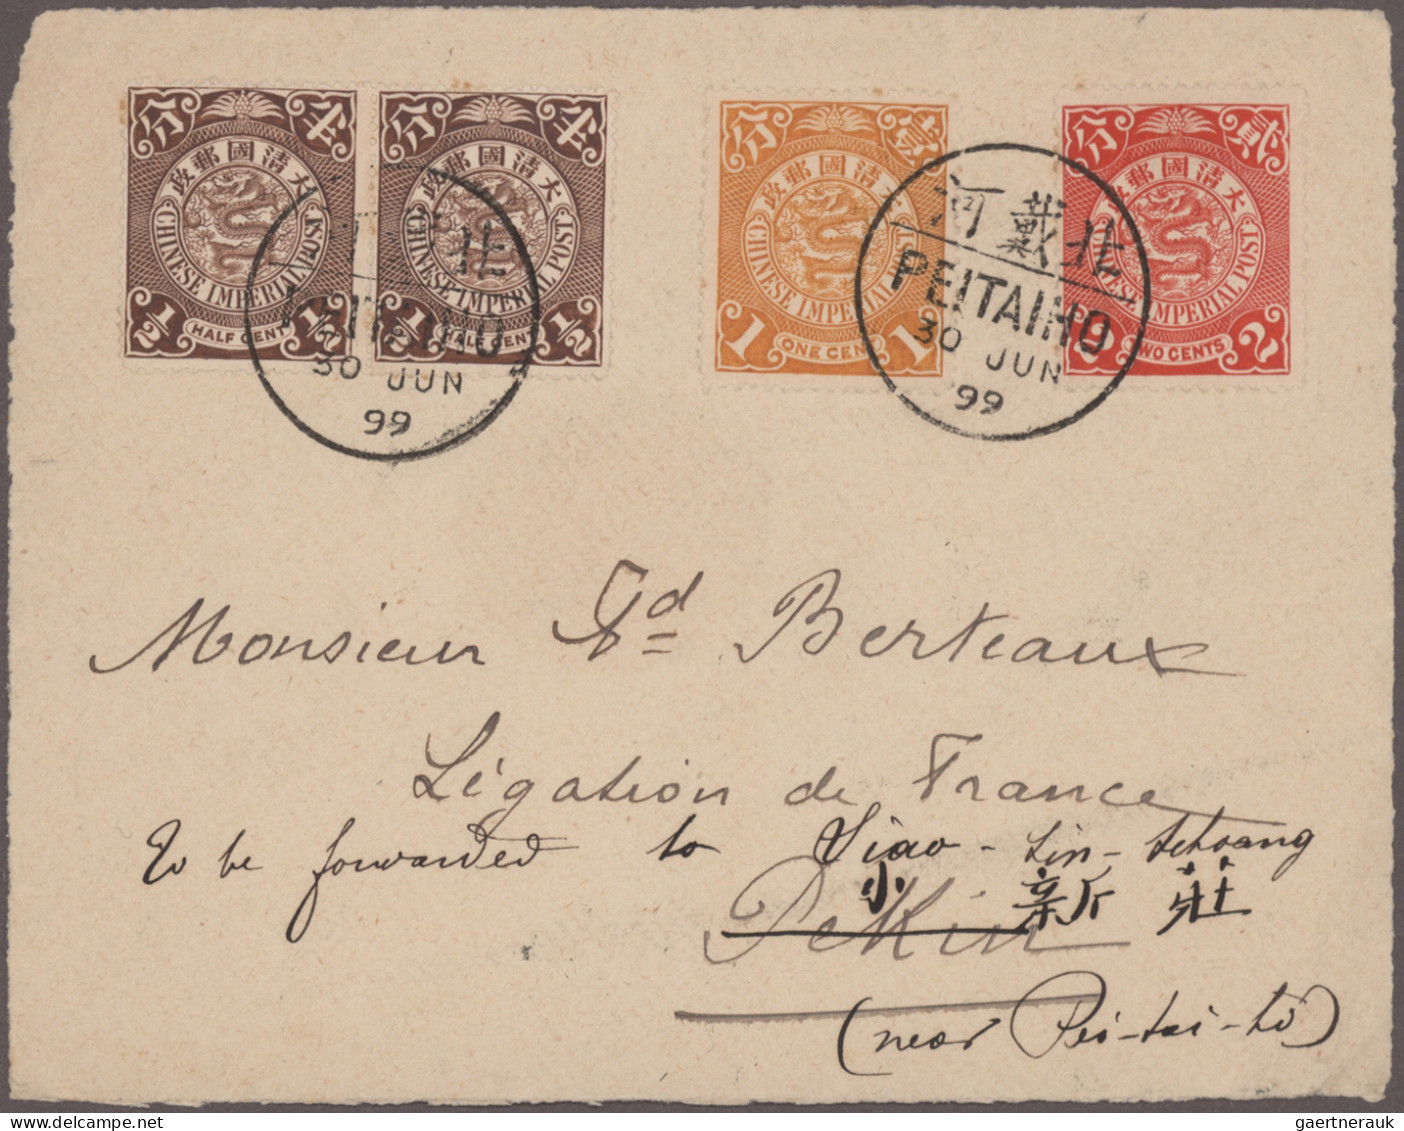 China: 1898, coiling dragons, five cover fronts used to Peking: 2 C. franks with